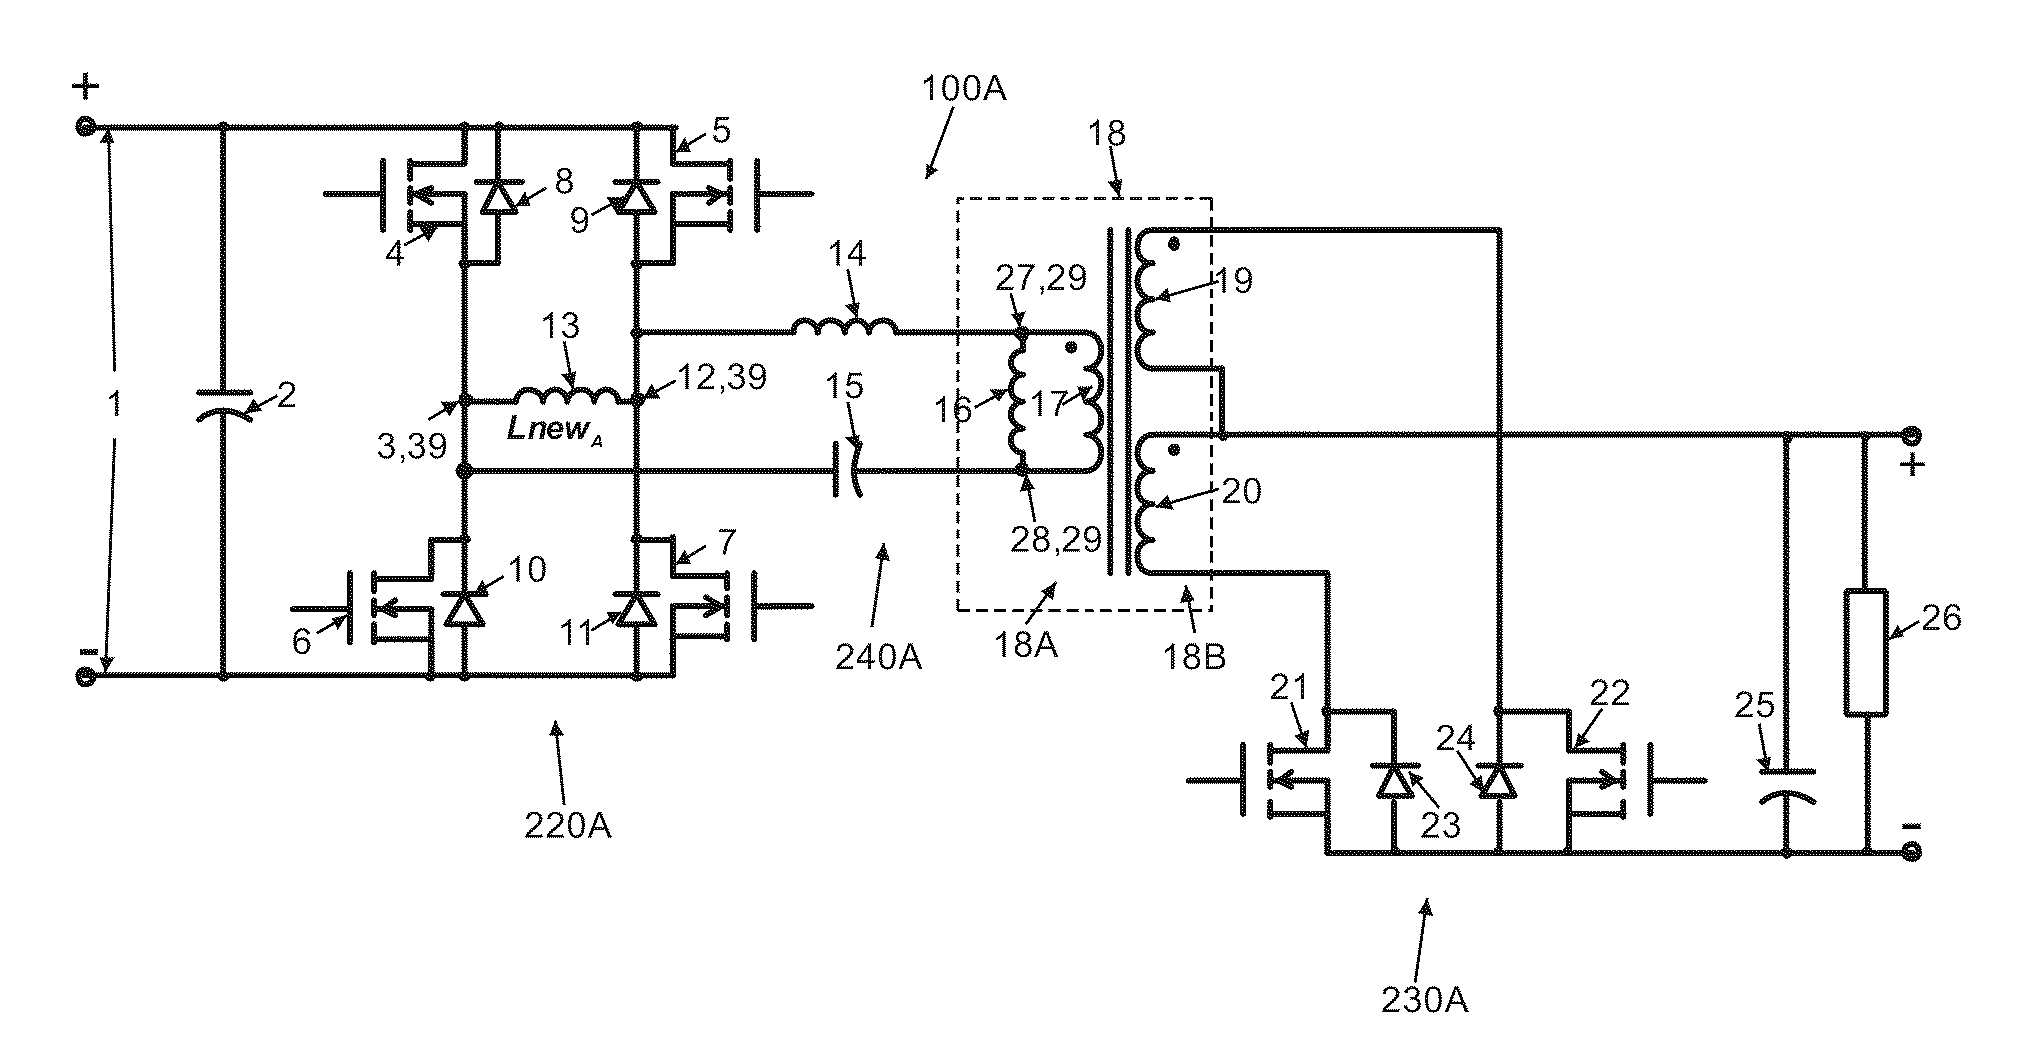 Bi-directional power converter with regulated output and soft switching